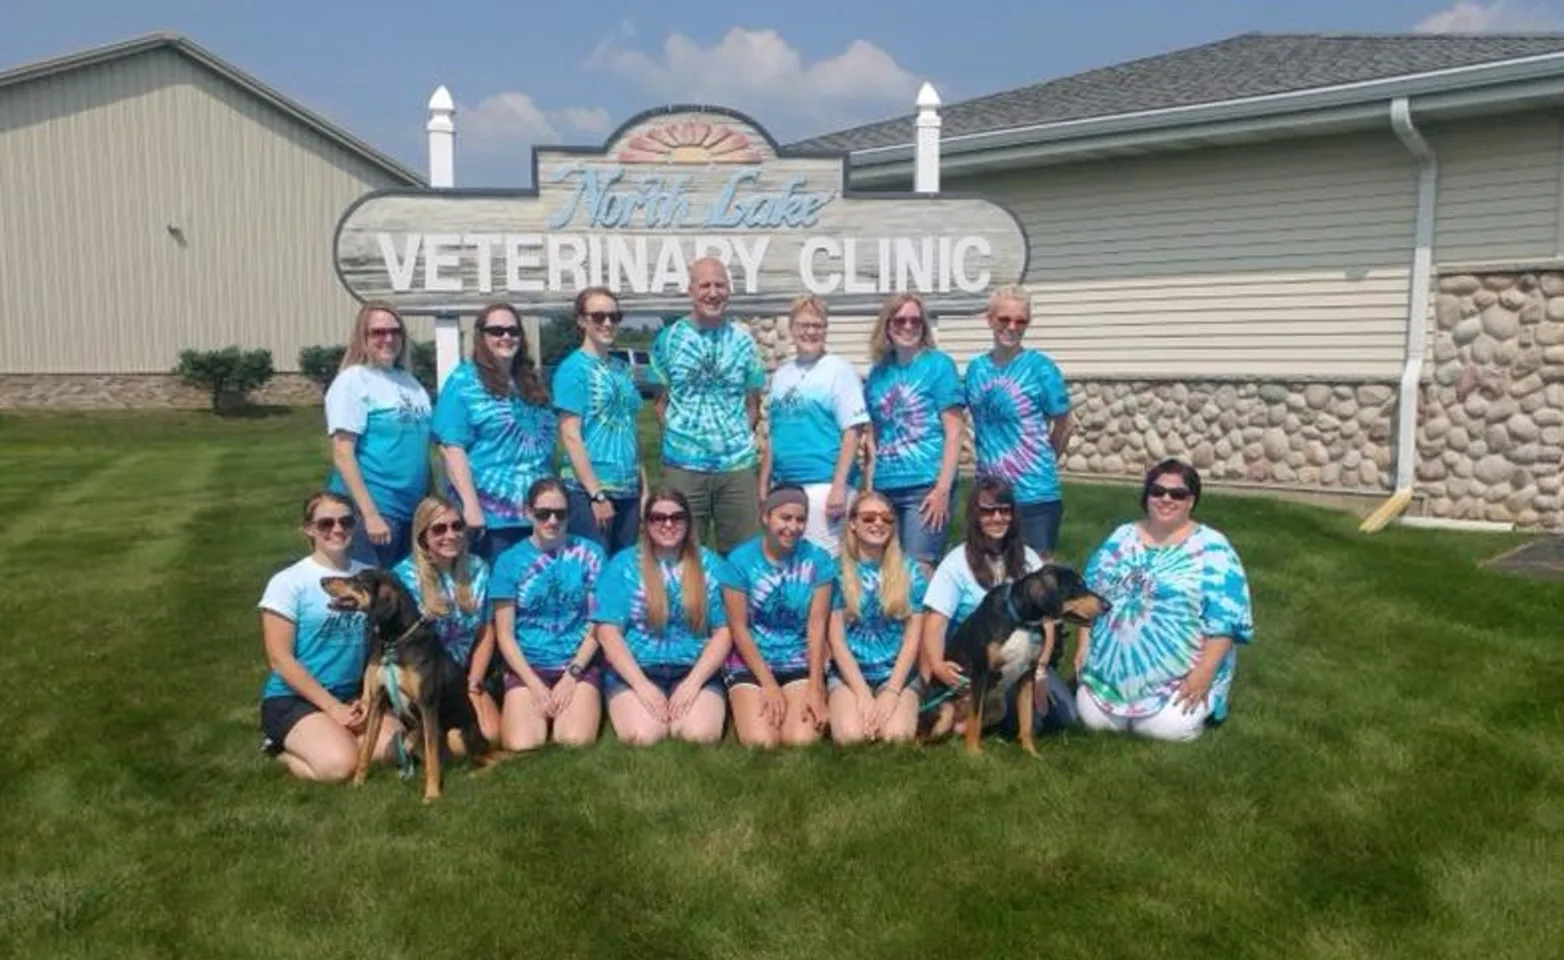 North Lake Veterinary Clinic's group staff photo outside of their building in front of their sign. 